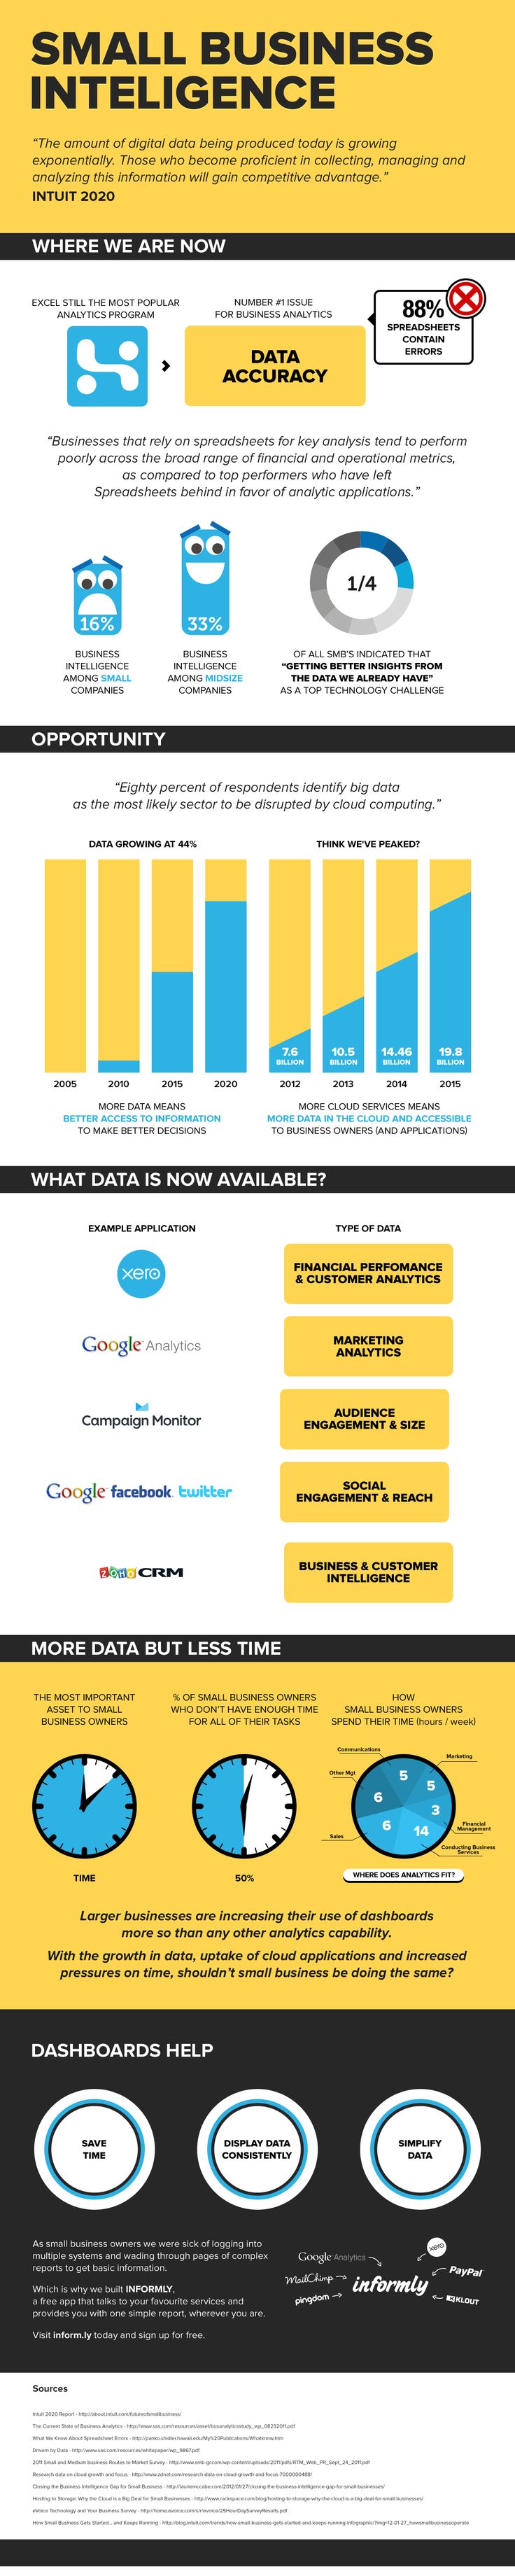 Psychology-Infographic-How-To-Get-Control-of-your-Data Psychology Infographic : How To Get Control of your Data: Small Business Intelligence - #infographic